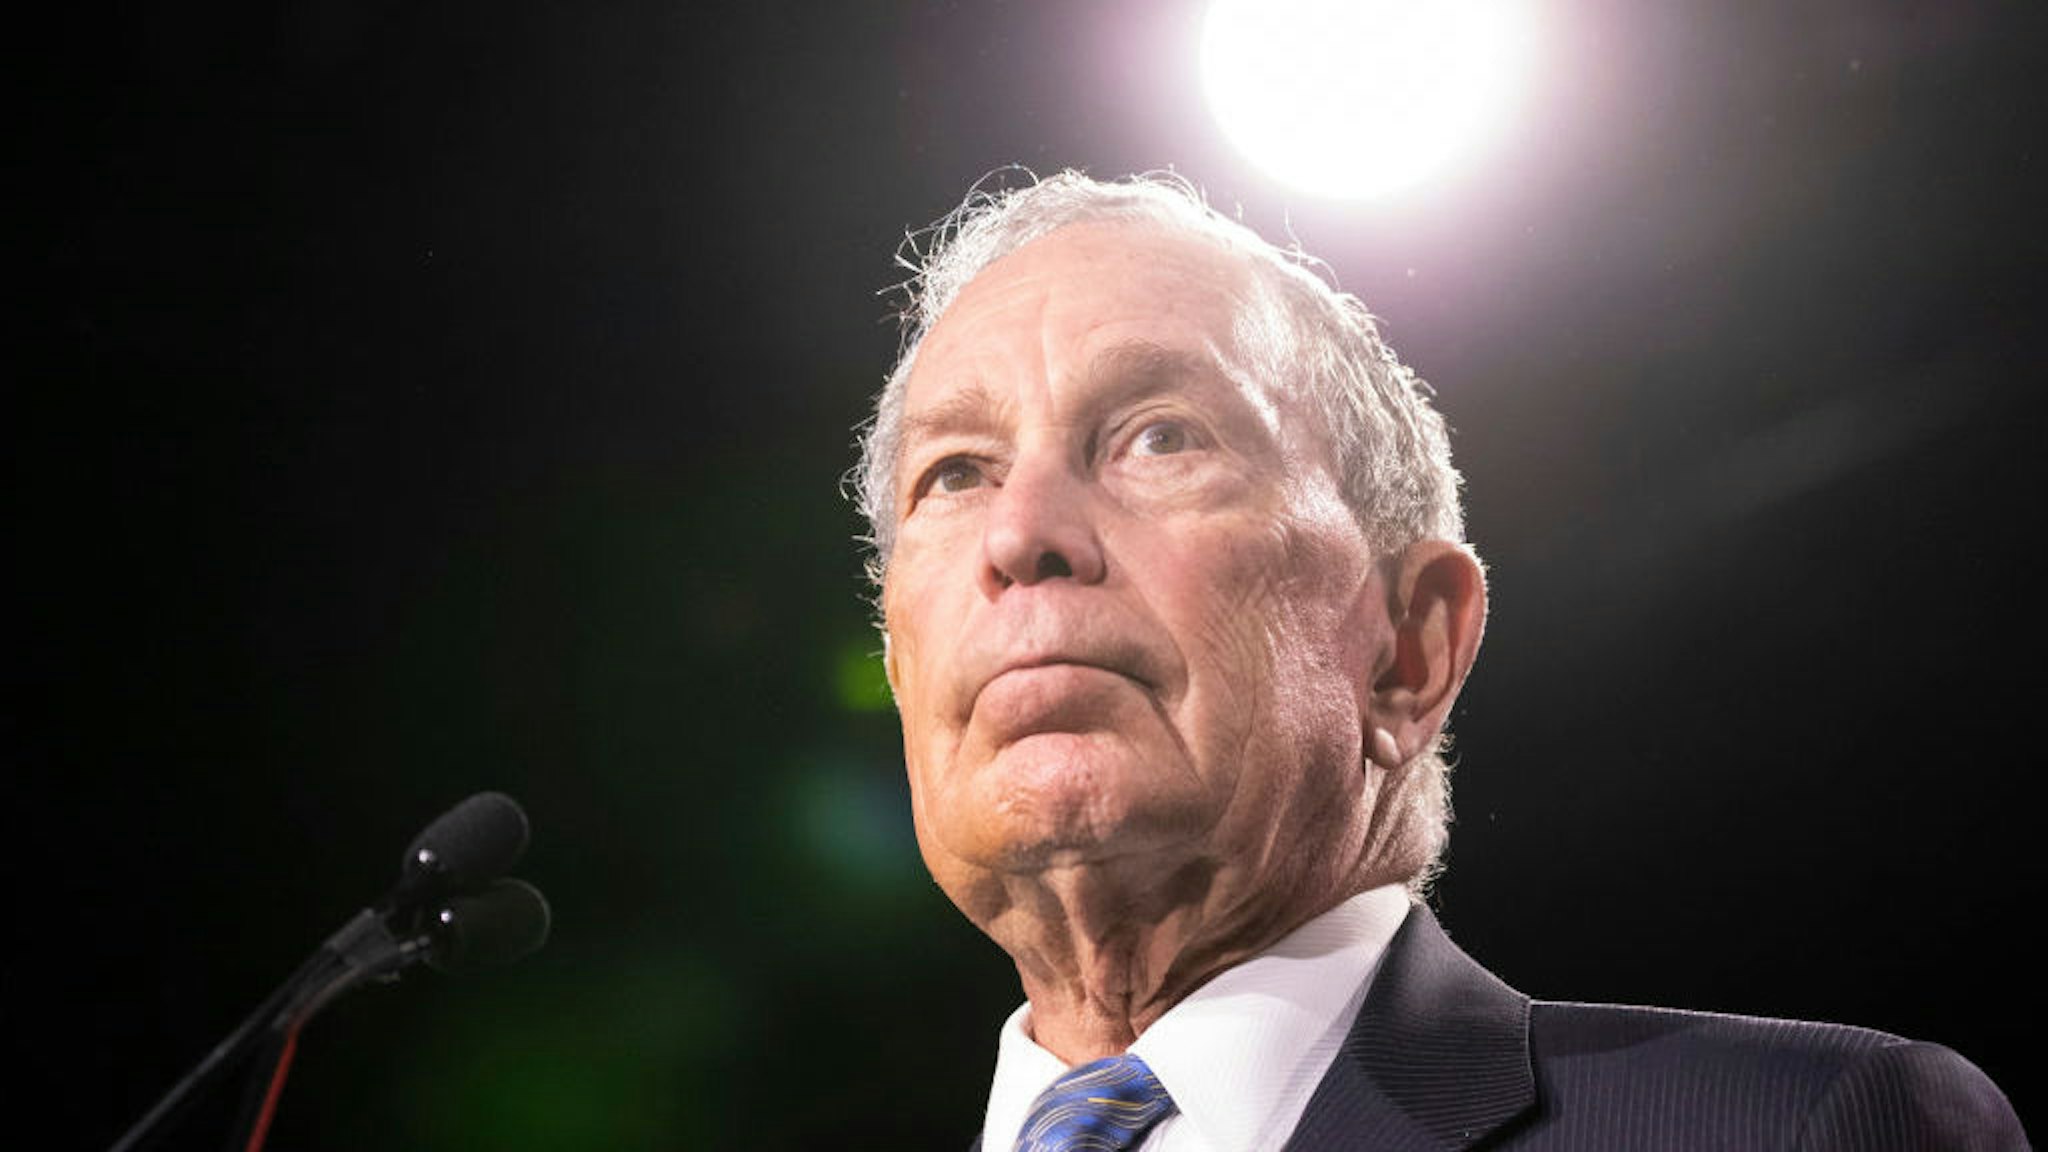 Democratic presidential candidate former New York City Mayor Mike Bloomberg delivers remarks during a campaign rally on February 12, 2020 in Nashville, Tennessee. Bloomberg is holding the rally to mark the beginning of early voting in Tennessee ahead of the Super Tuesday primary on March 3rd. (Photo by Brett Carlsen/Getty Images)